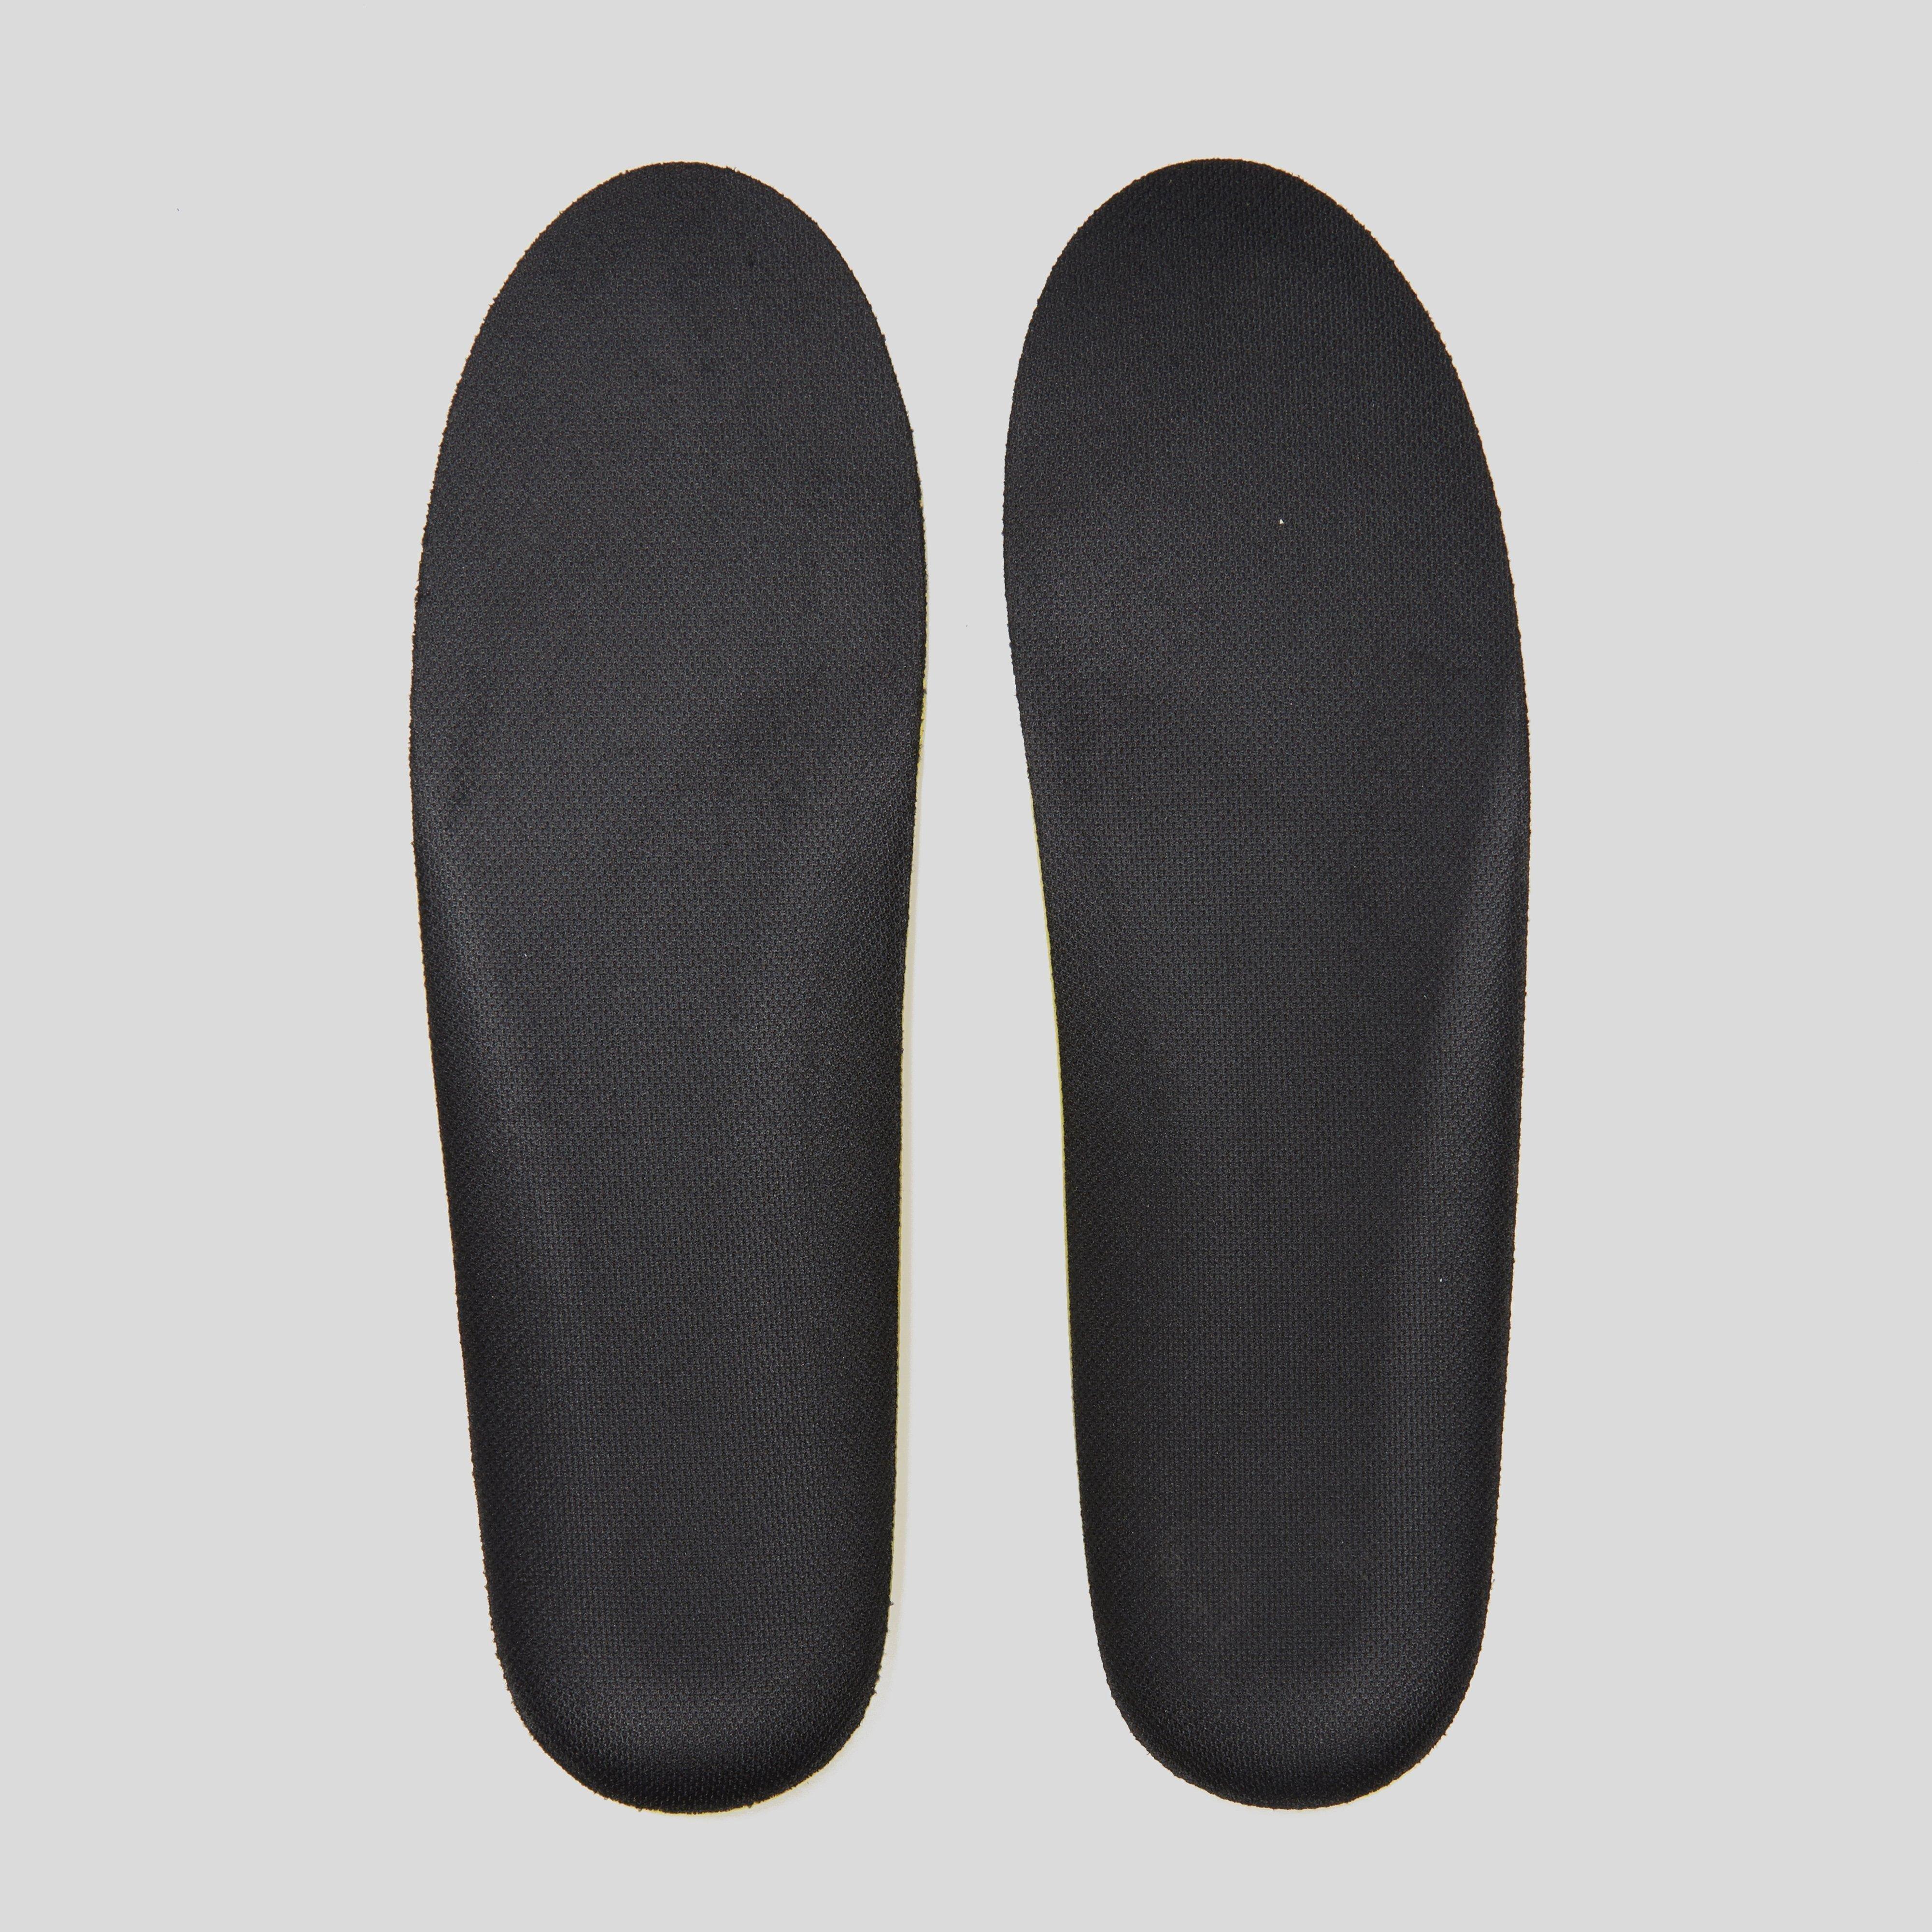 Image of 5mm Insoles Black